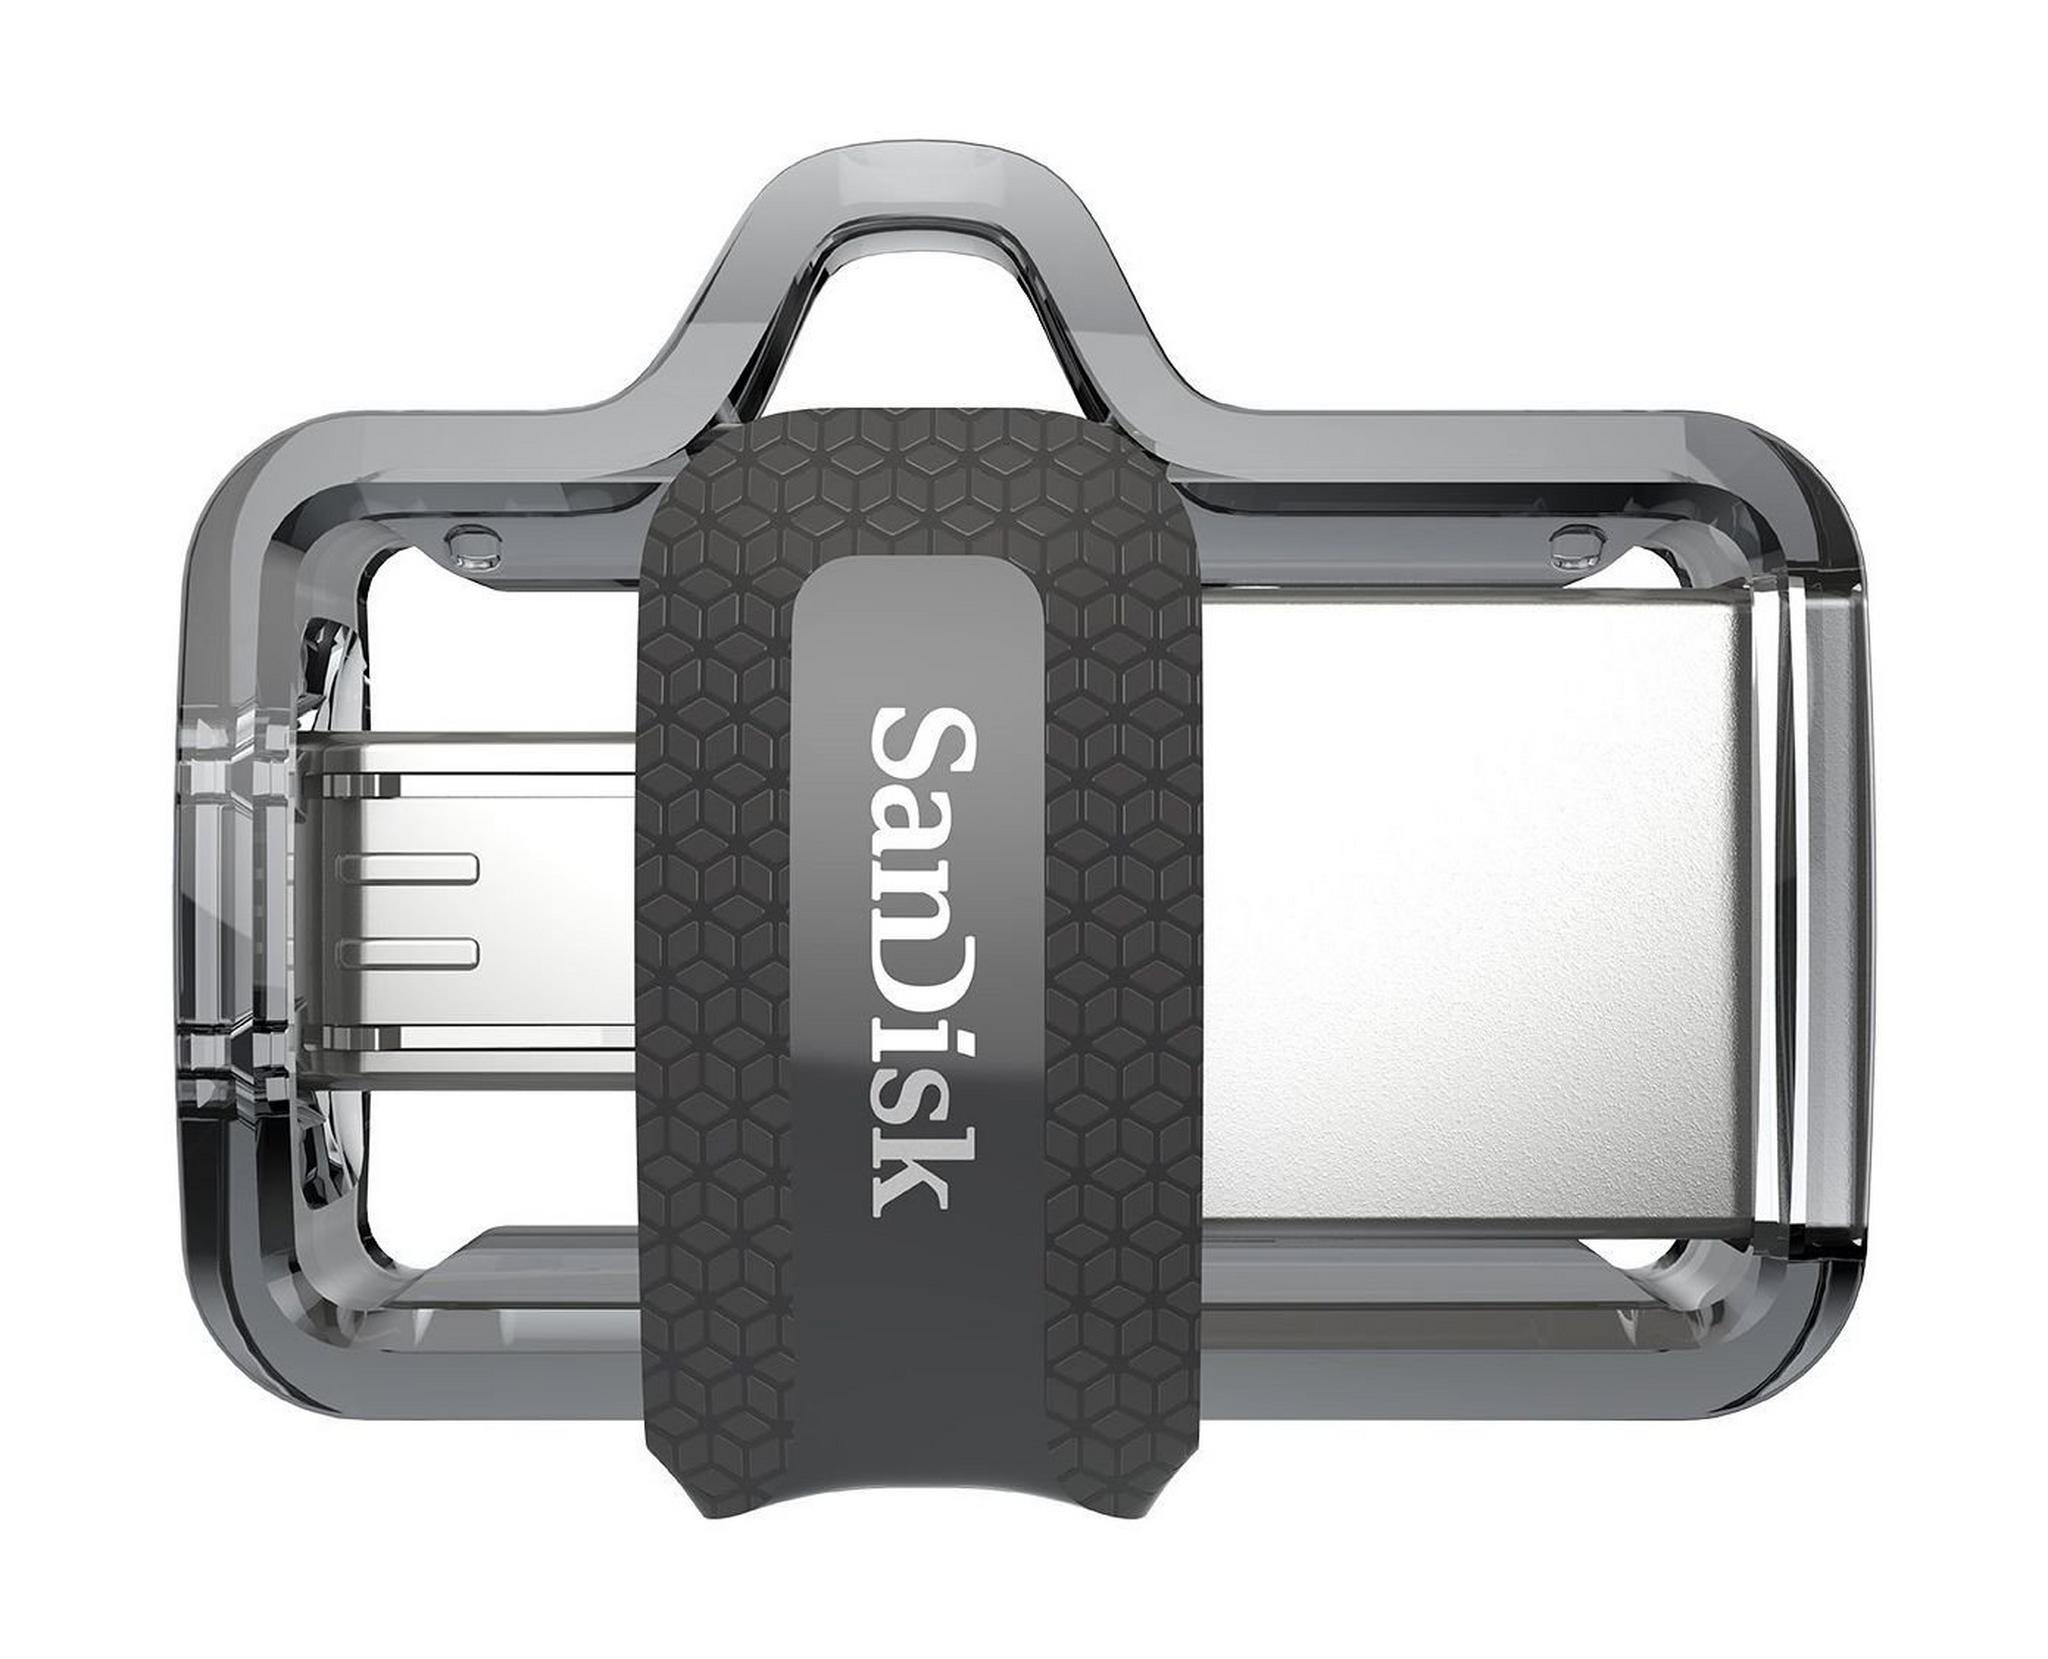 Sandisk 32GB M3.0 Dual USB Drive for Android Devices & Computer - (DD3-032G-G46)